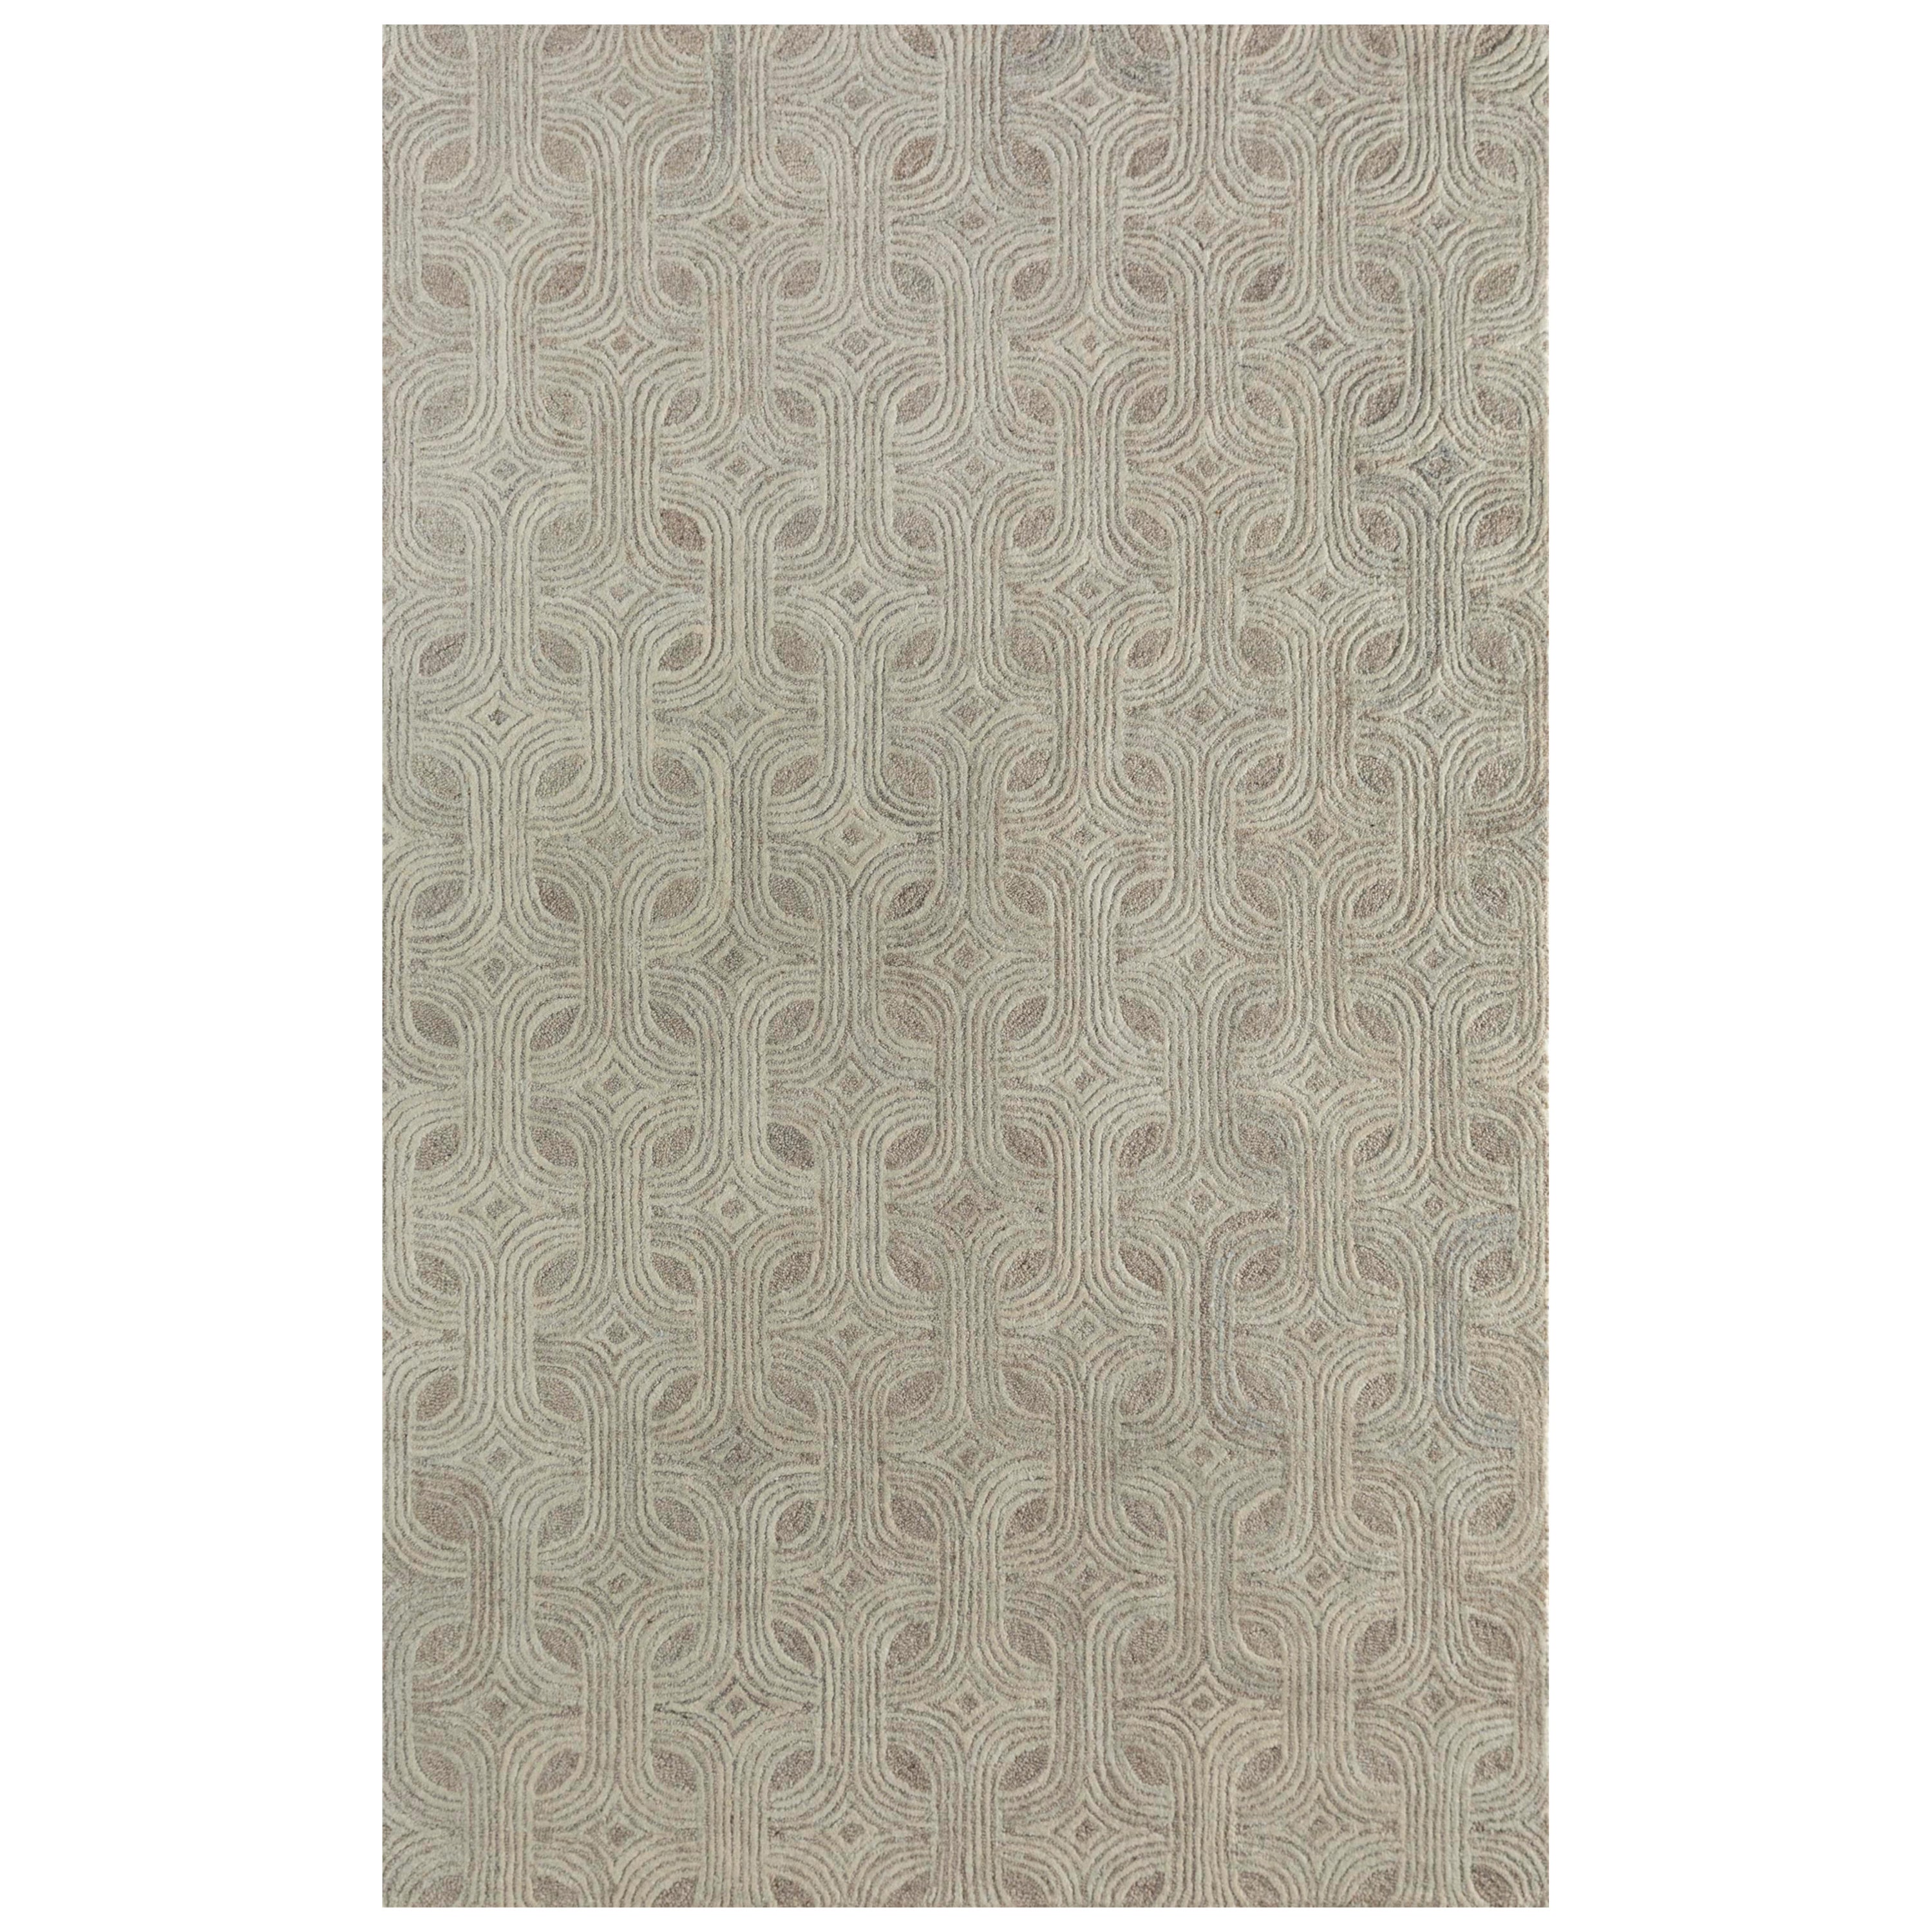 Whispering Sands Undyed White Natural Camel Hand-Tufted Rug